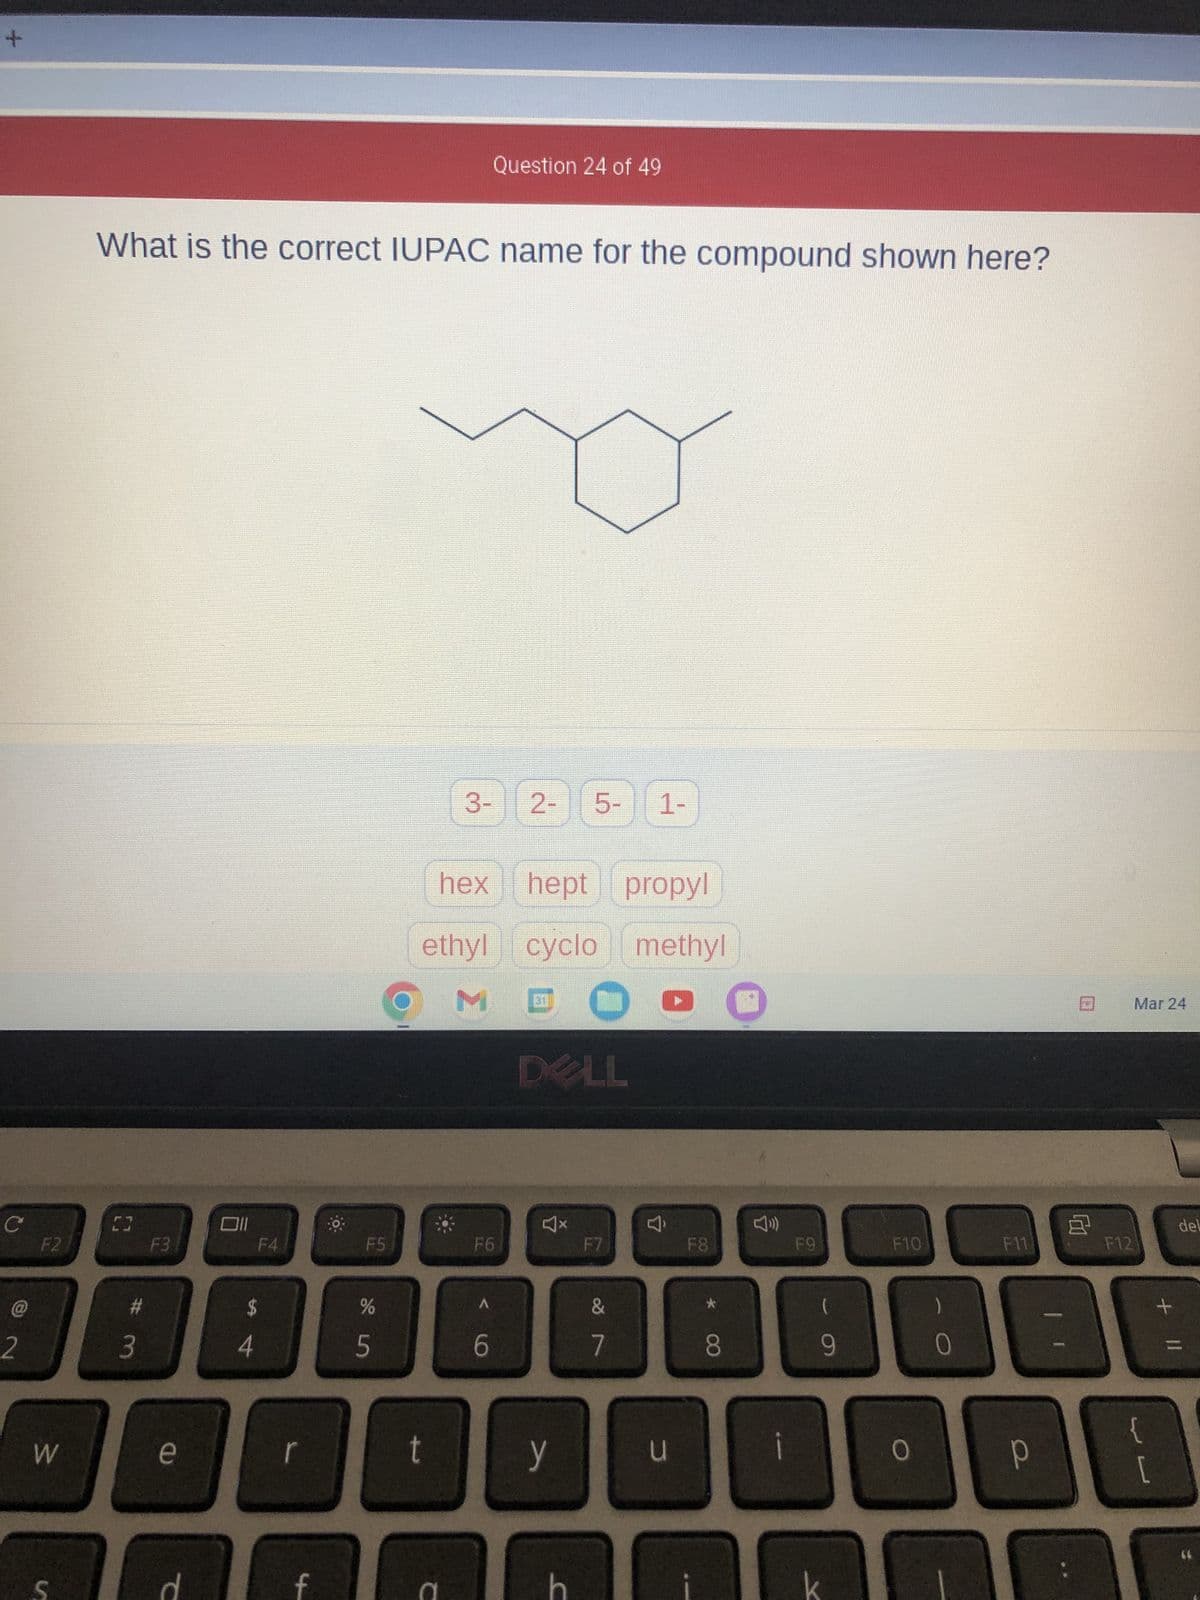 +
C
2
F2
W
S
What is the correct IUPAC name for the compound shown here?
C3
#
3
F3
e
T
Oll
F4
$
54
D
f
F5
%
5
hex
ethyl
M
t
3-
C
Question 24 of 49
F6
A
6
2- 5- 1-
hept propyl
cyclo methyl
(
DELL
y
C
F7
&
7
u
F8
8
F9
9
F10
0
0
8
F11 F12
B
Р
Mar 24
L
+ 11
del